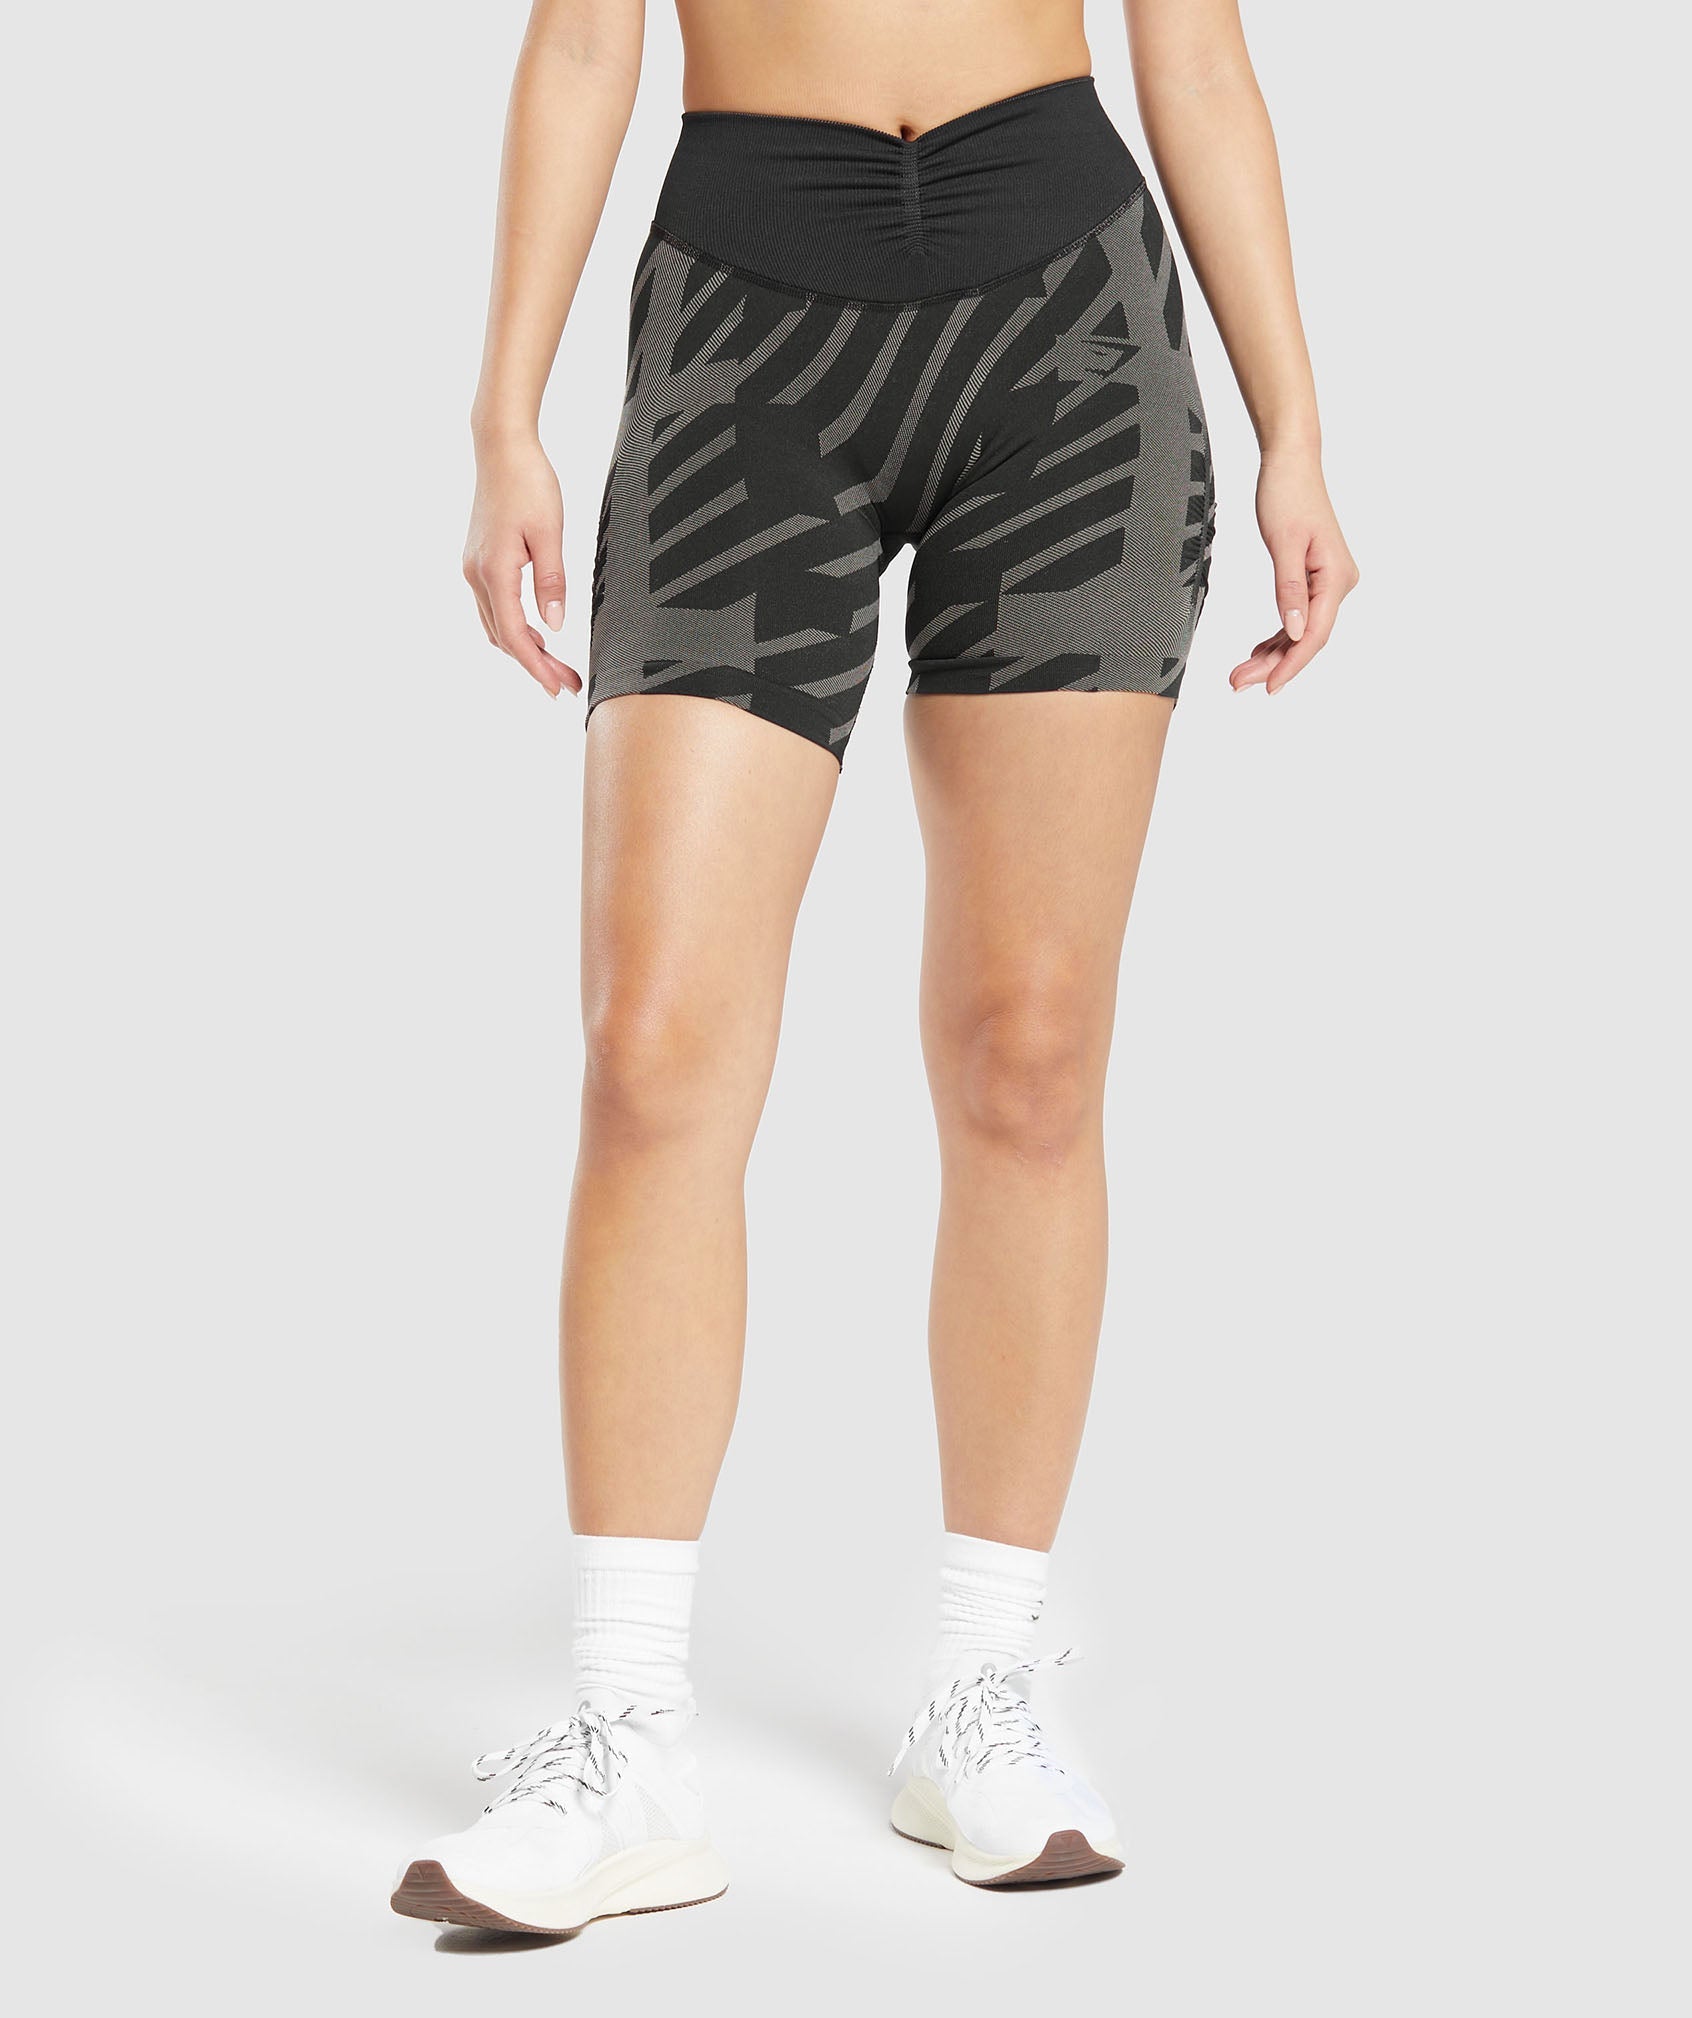 Apex Limit Seamless Ruched Shorts